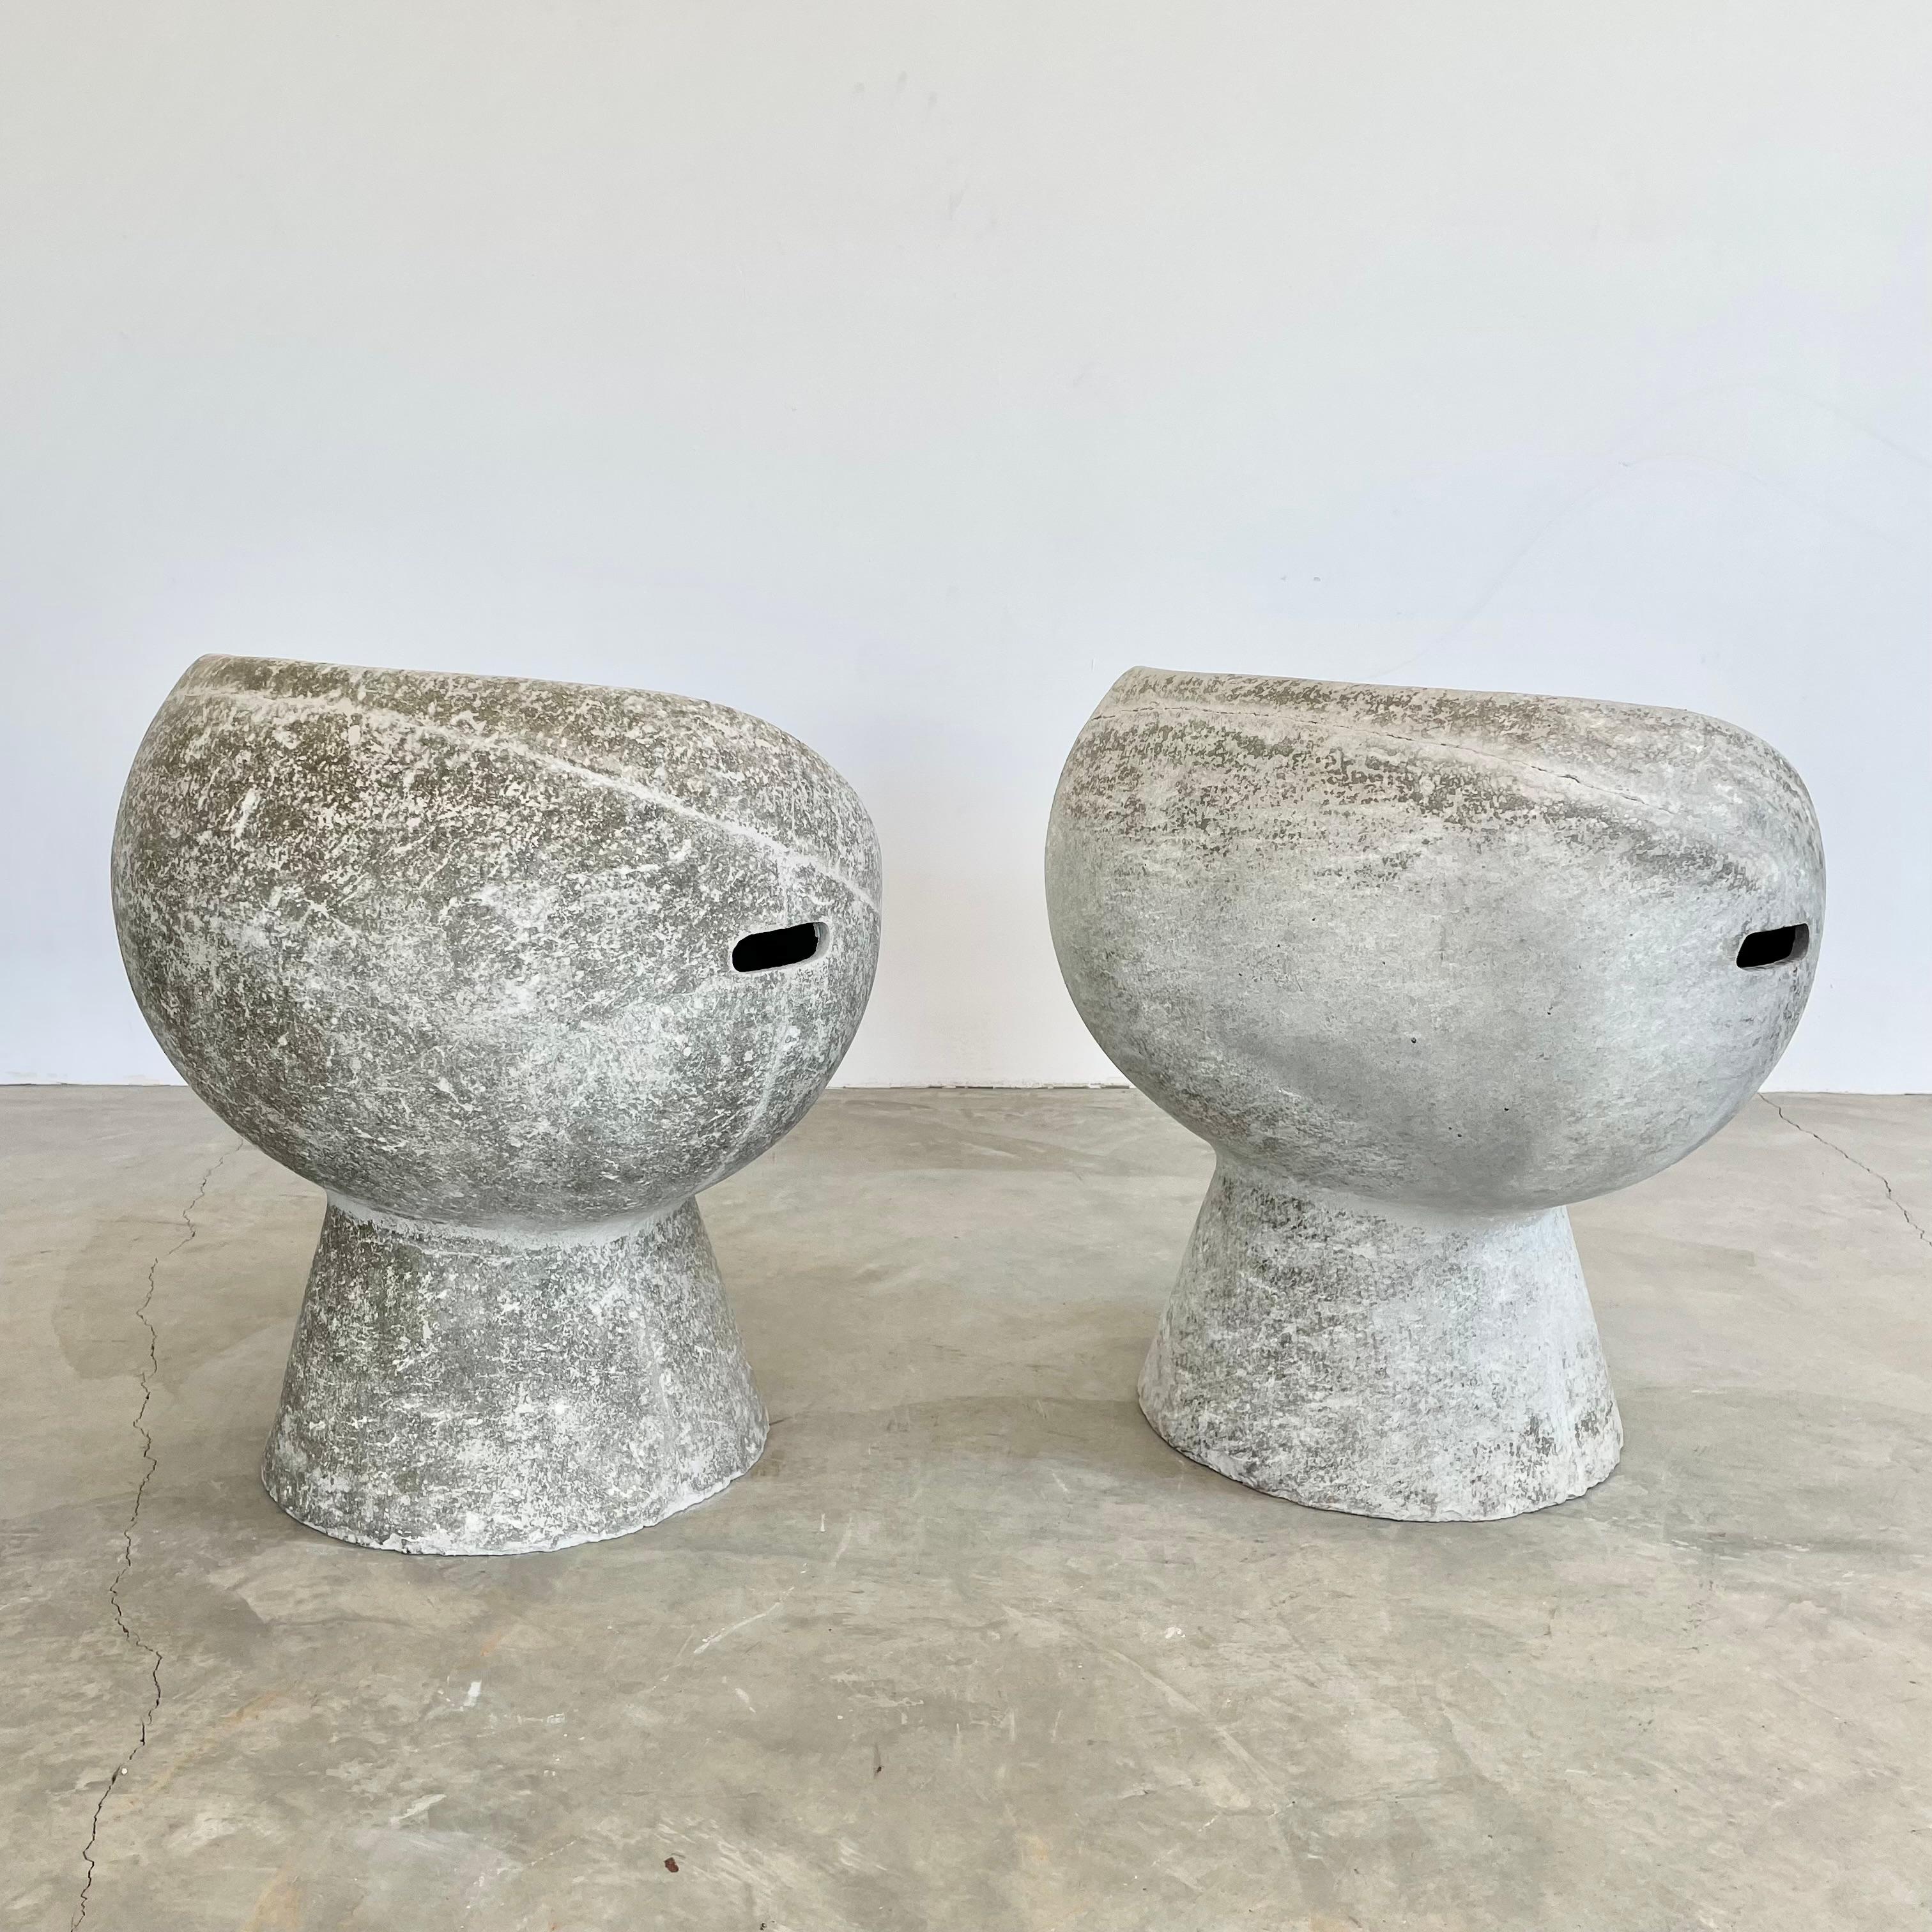 Hand-Crafted Willy Guhl Concrete Pod Chairs, 1960s Switzerland